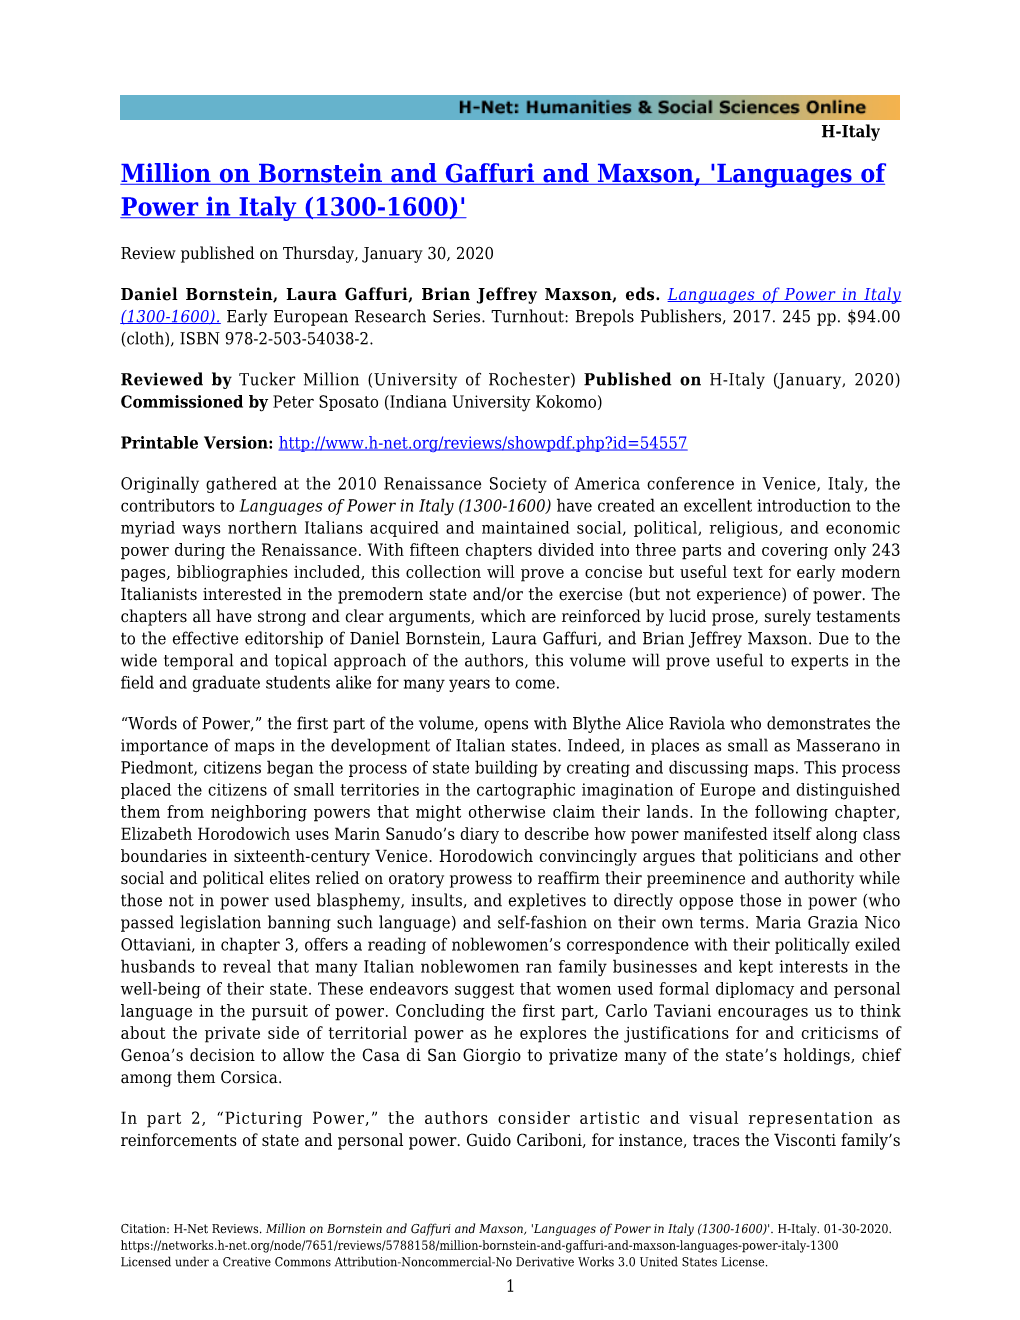 Million on Bornstein and Gaffuri and Maxson, 'Languages of Power in Italy (1300-1600)'